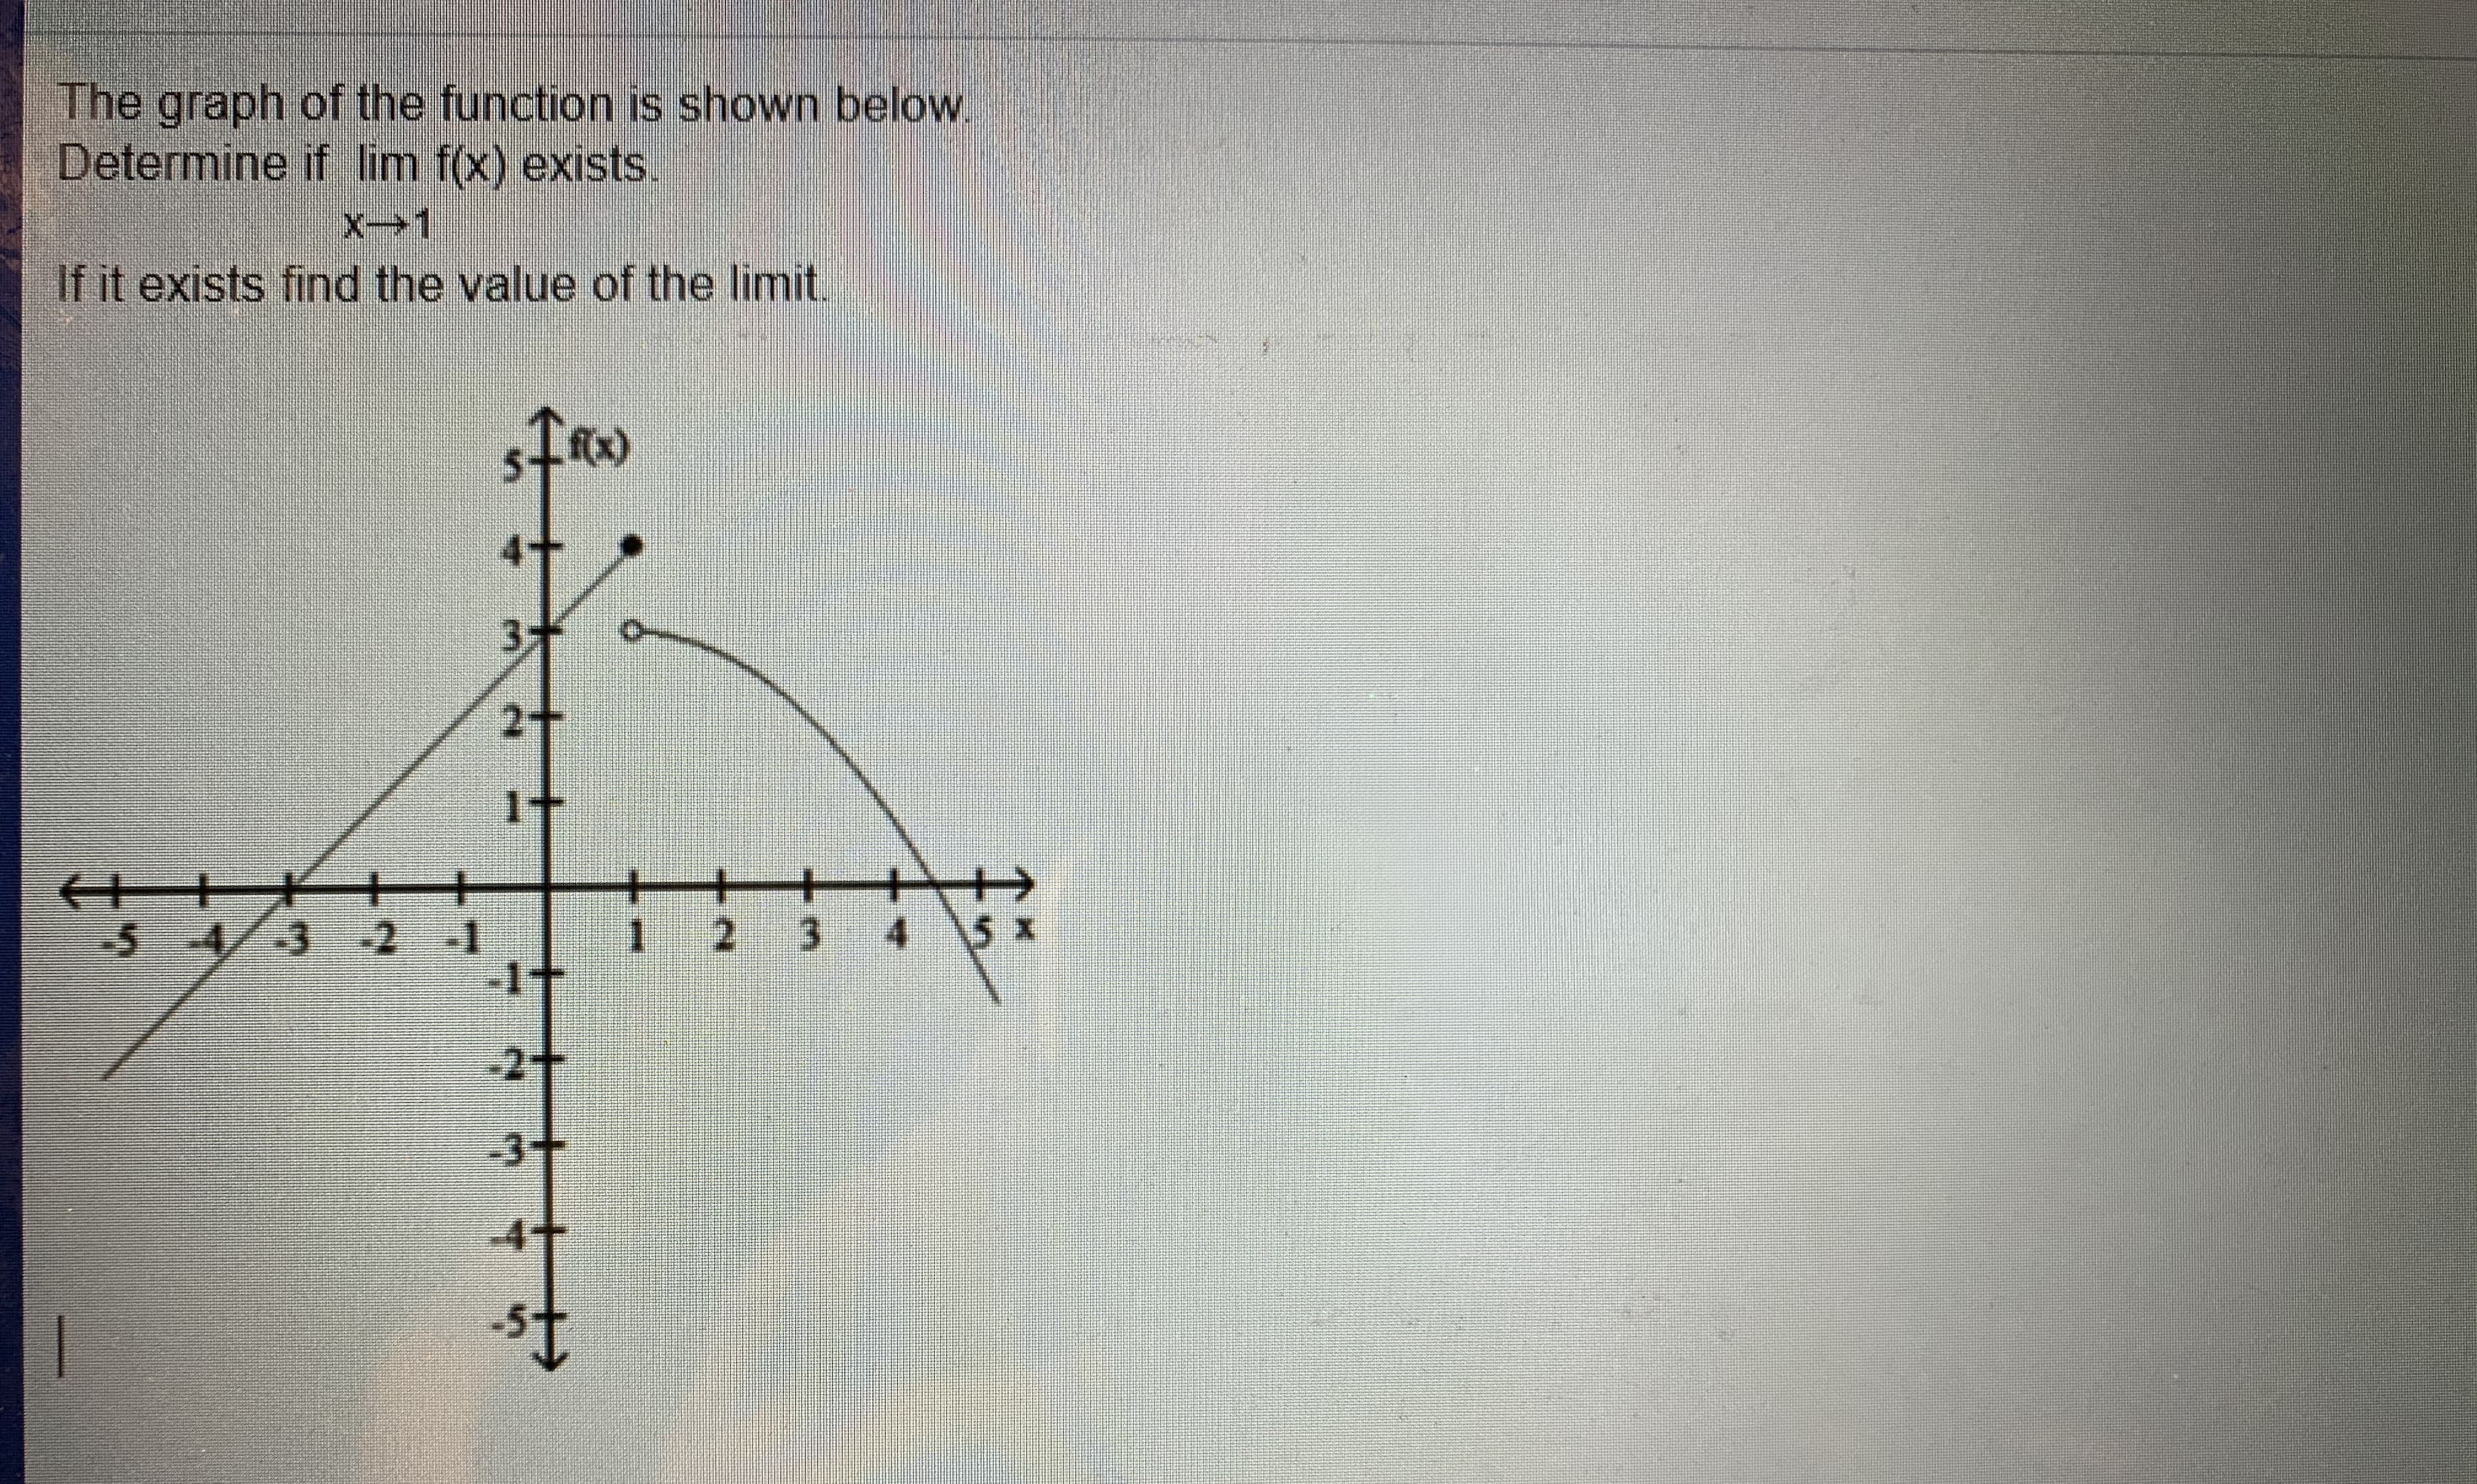 The graph of the function is shown below.
Determine if lim f(x) exists.
If it exists find the value of the limit.
34
2-
5 4/3 -2 -1
1 2 3
4.
5>
-2+
-3+
-4+
